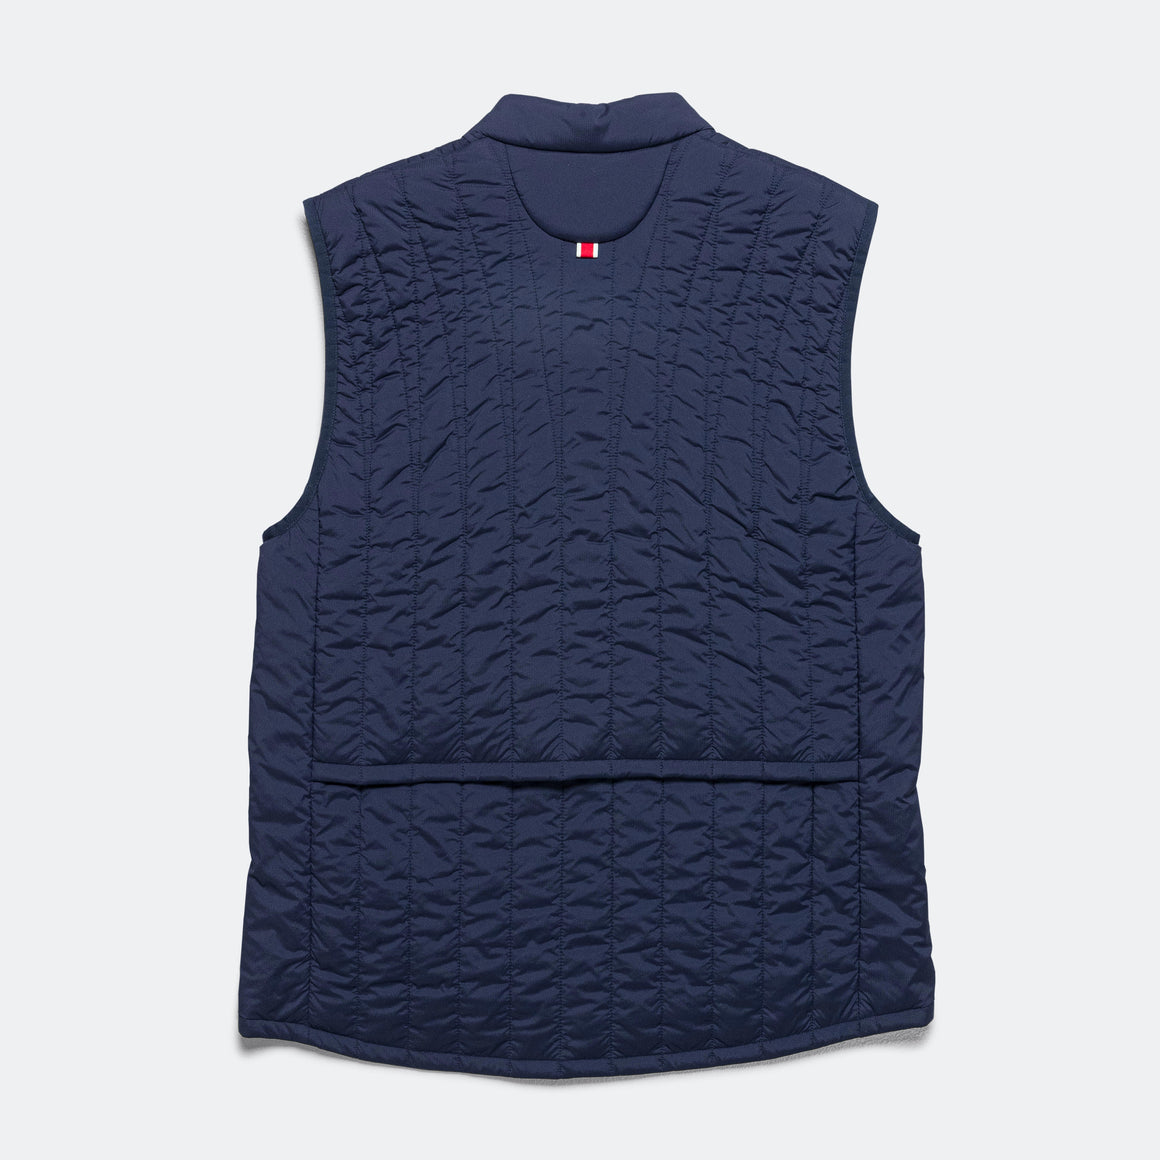 Tracksmith - Mens Harbor Insulated Vest - Navy - Up There Athletics